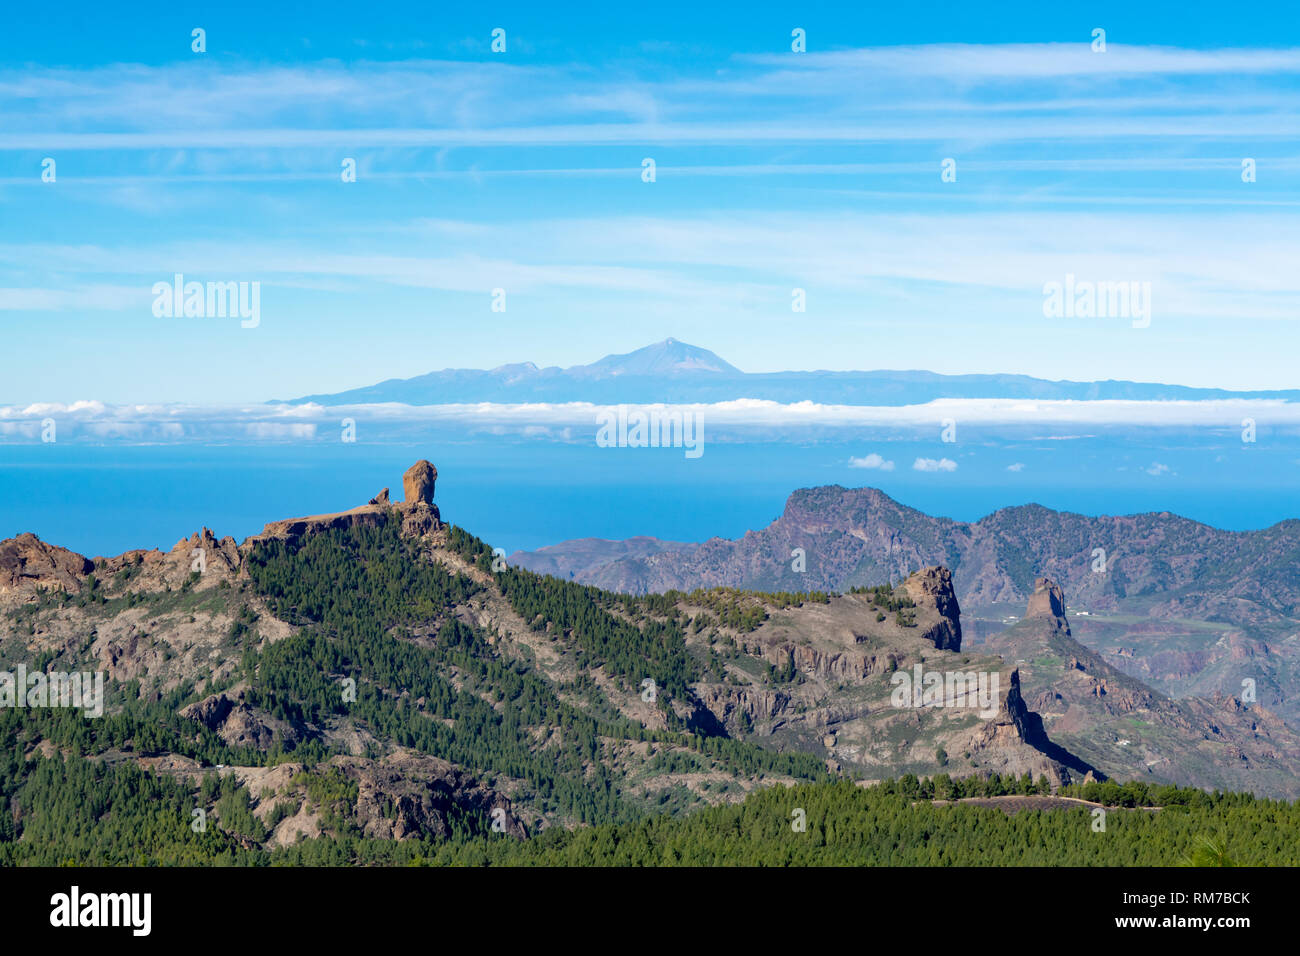 Gran Canaria island mountains and valleys landscape, view from highest peak Pico  de las Nieves to Roque Nublo and Mount Teide on Tenerife Stock Photo - Alamy